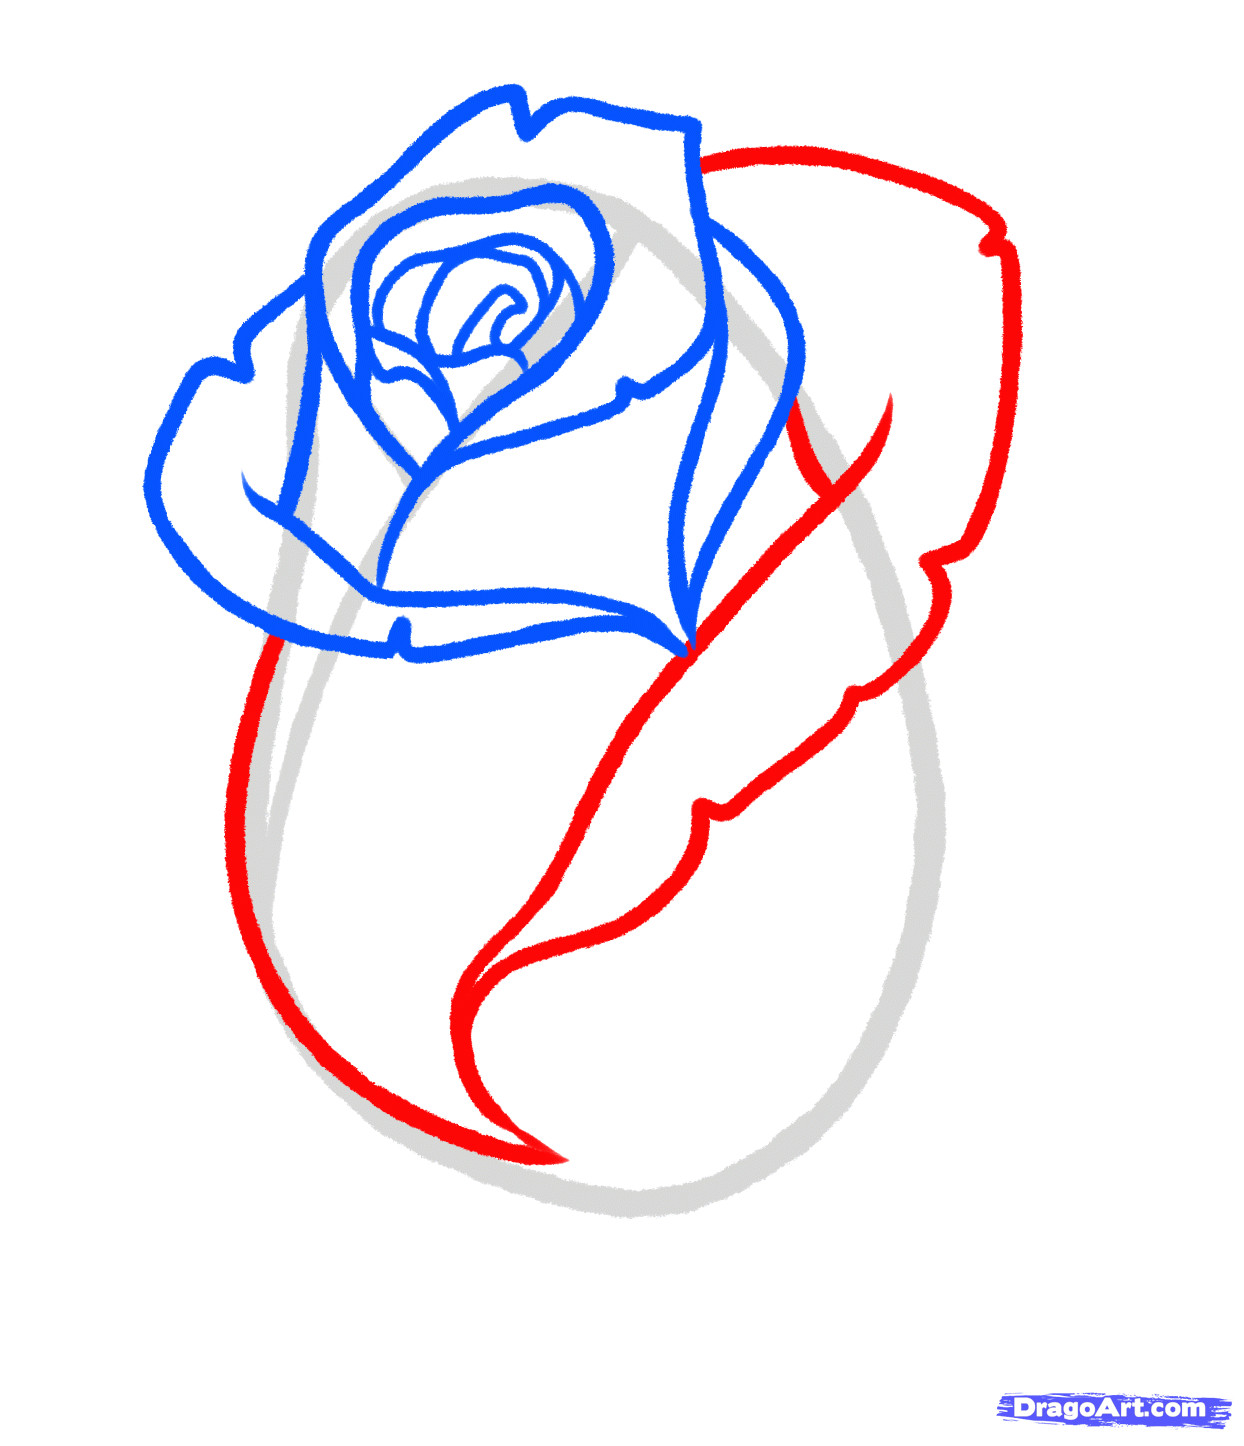 Drawing A Rose Bud How to Draw A Rose Bud Rose Bud Step 5 Sketching Flowers